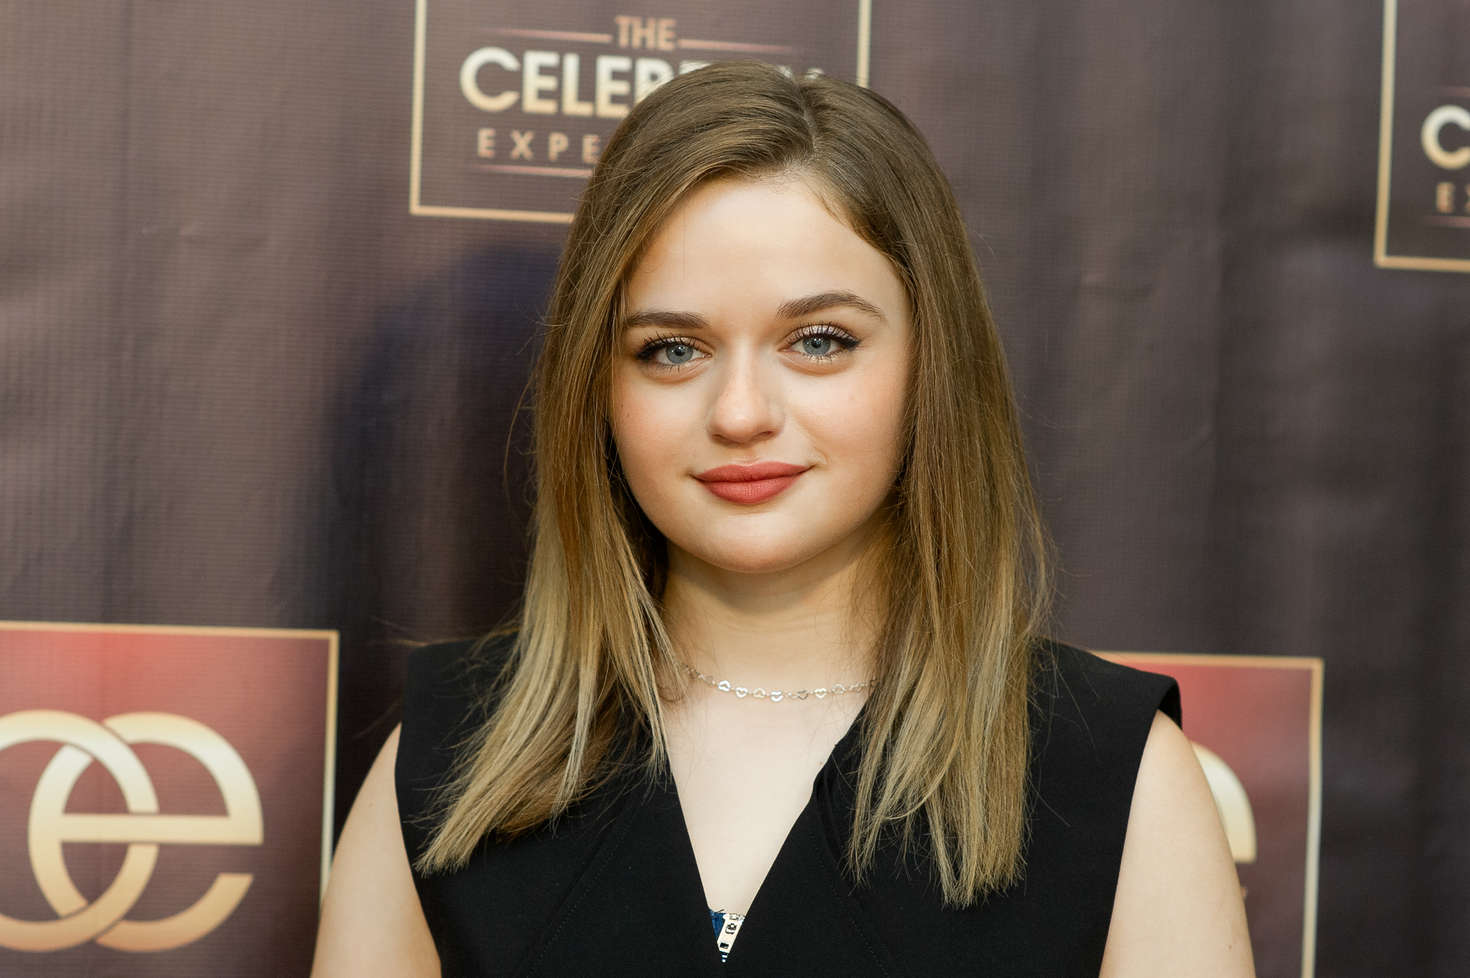 Joey King 2016 : Joey King: The Celebrity Experience Q A Panel -02. 